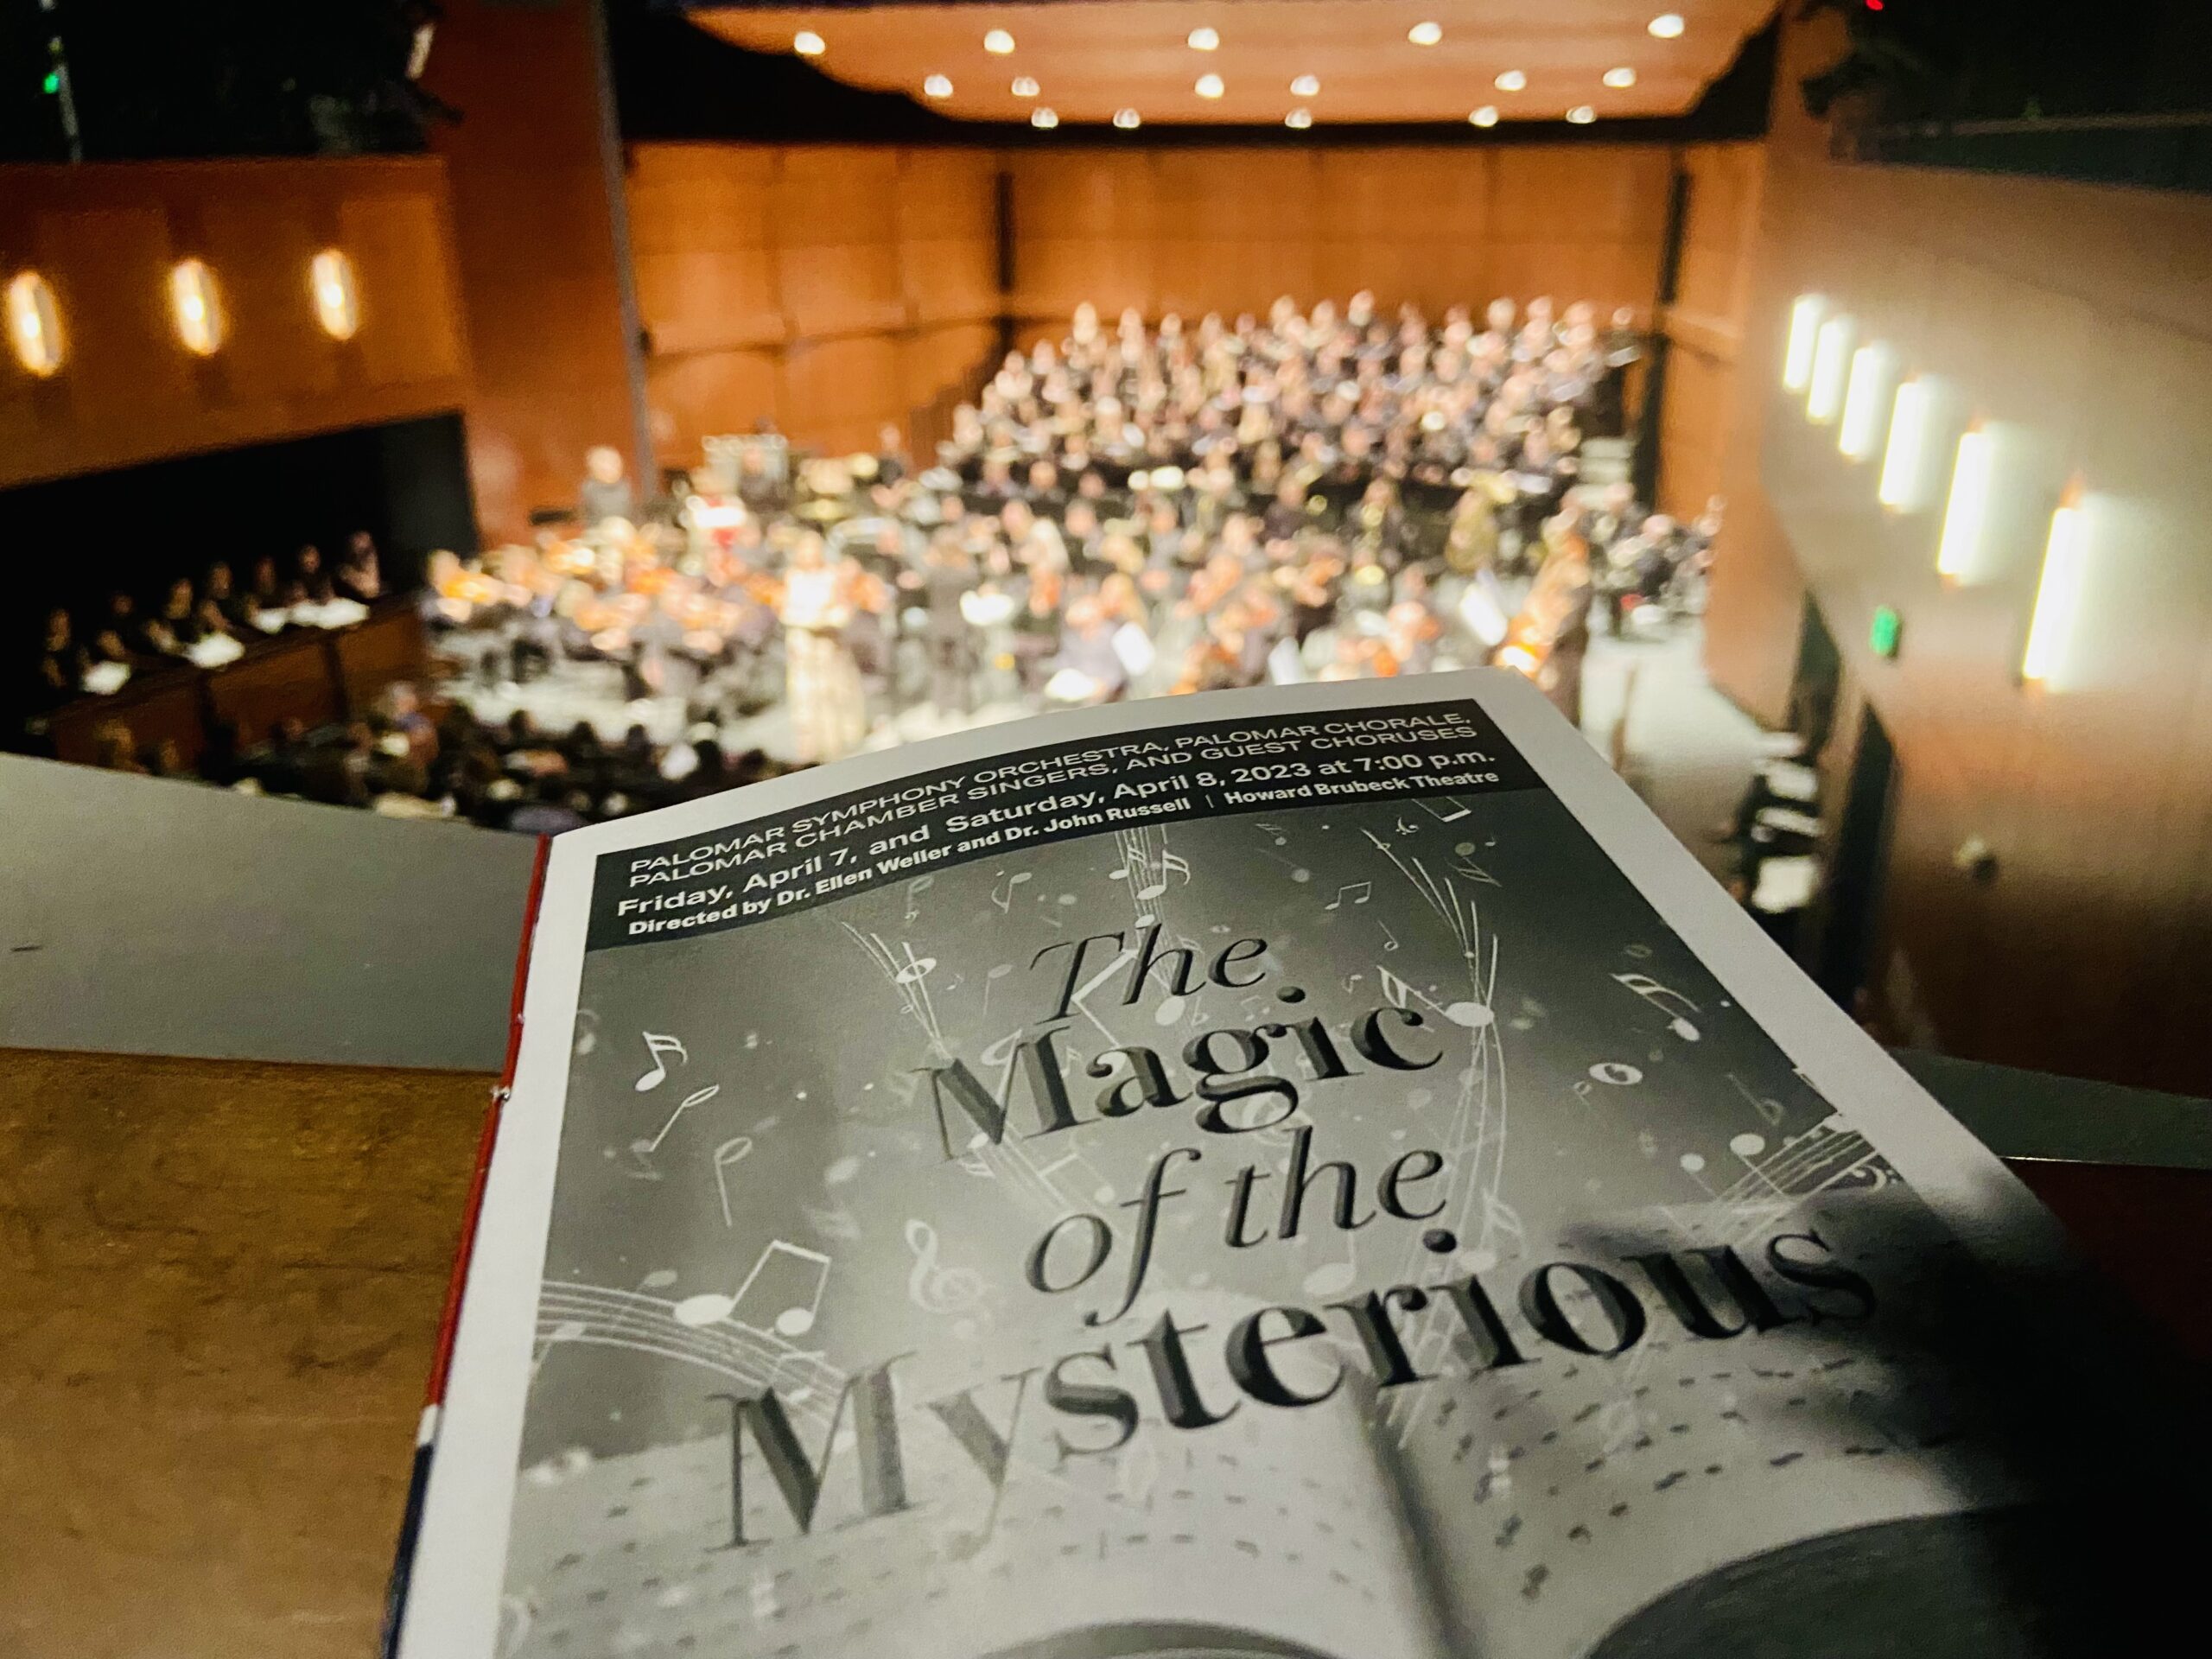 A pamplet of "The Magic of the Mysterious" lies on a ledge overlooking an orchestra below.